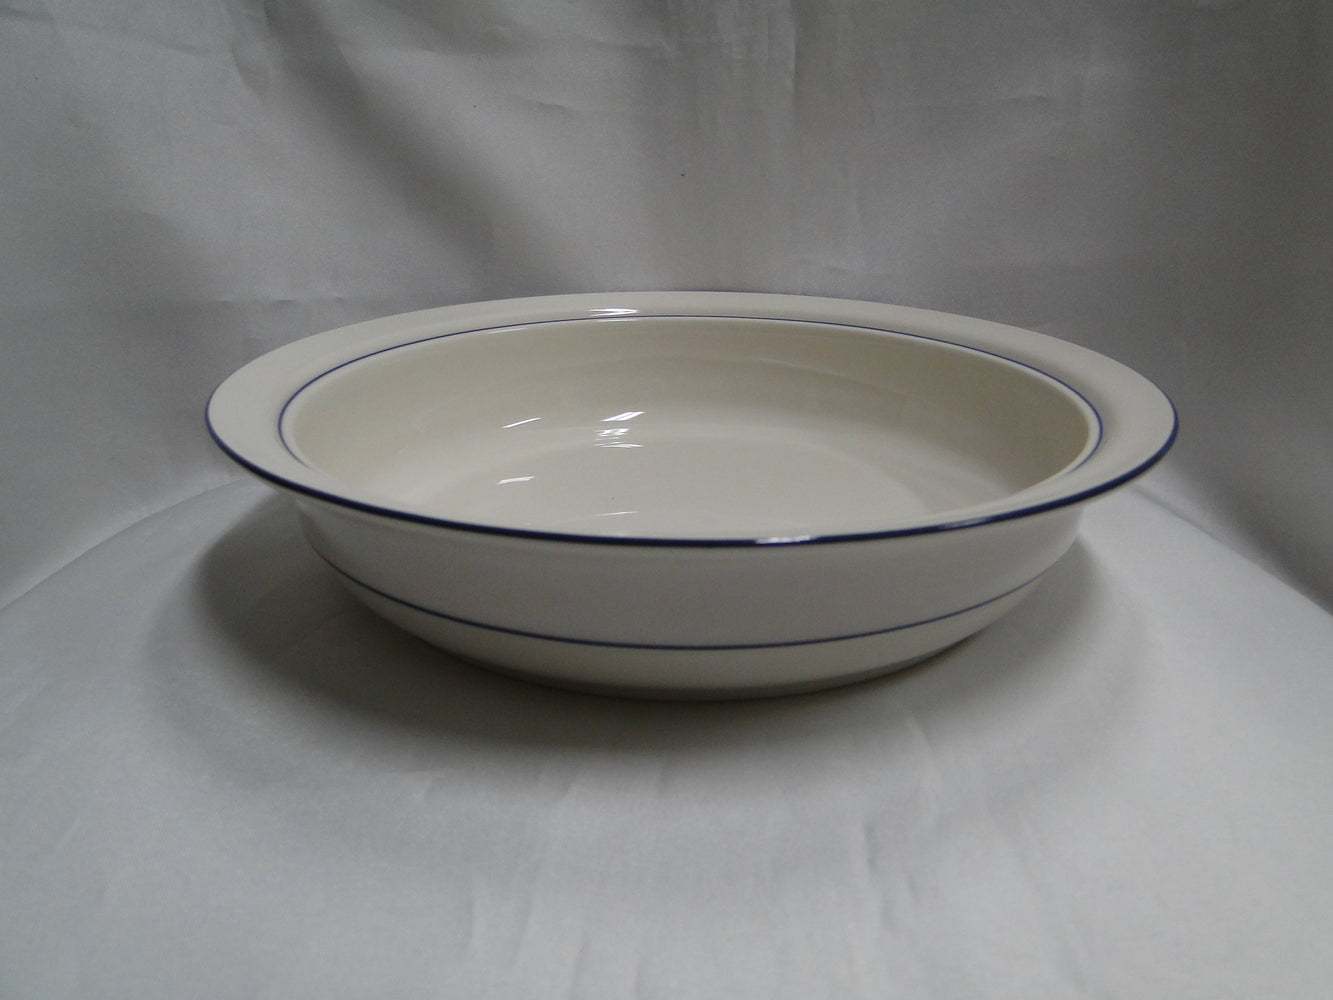 Lenox For the Blue Patterns, Chinastone: Round Serving Bowl (s), 9 7/8" x 2"